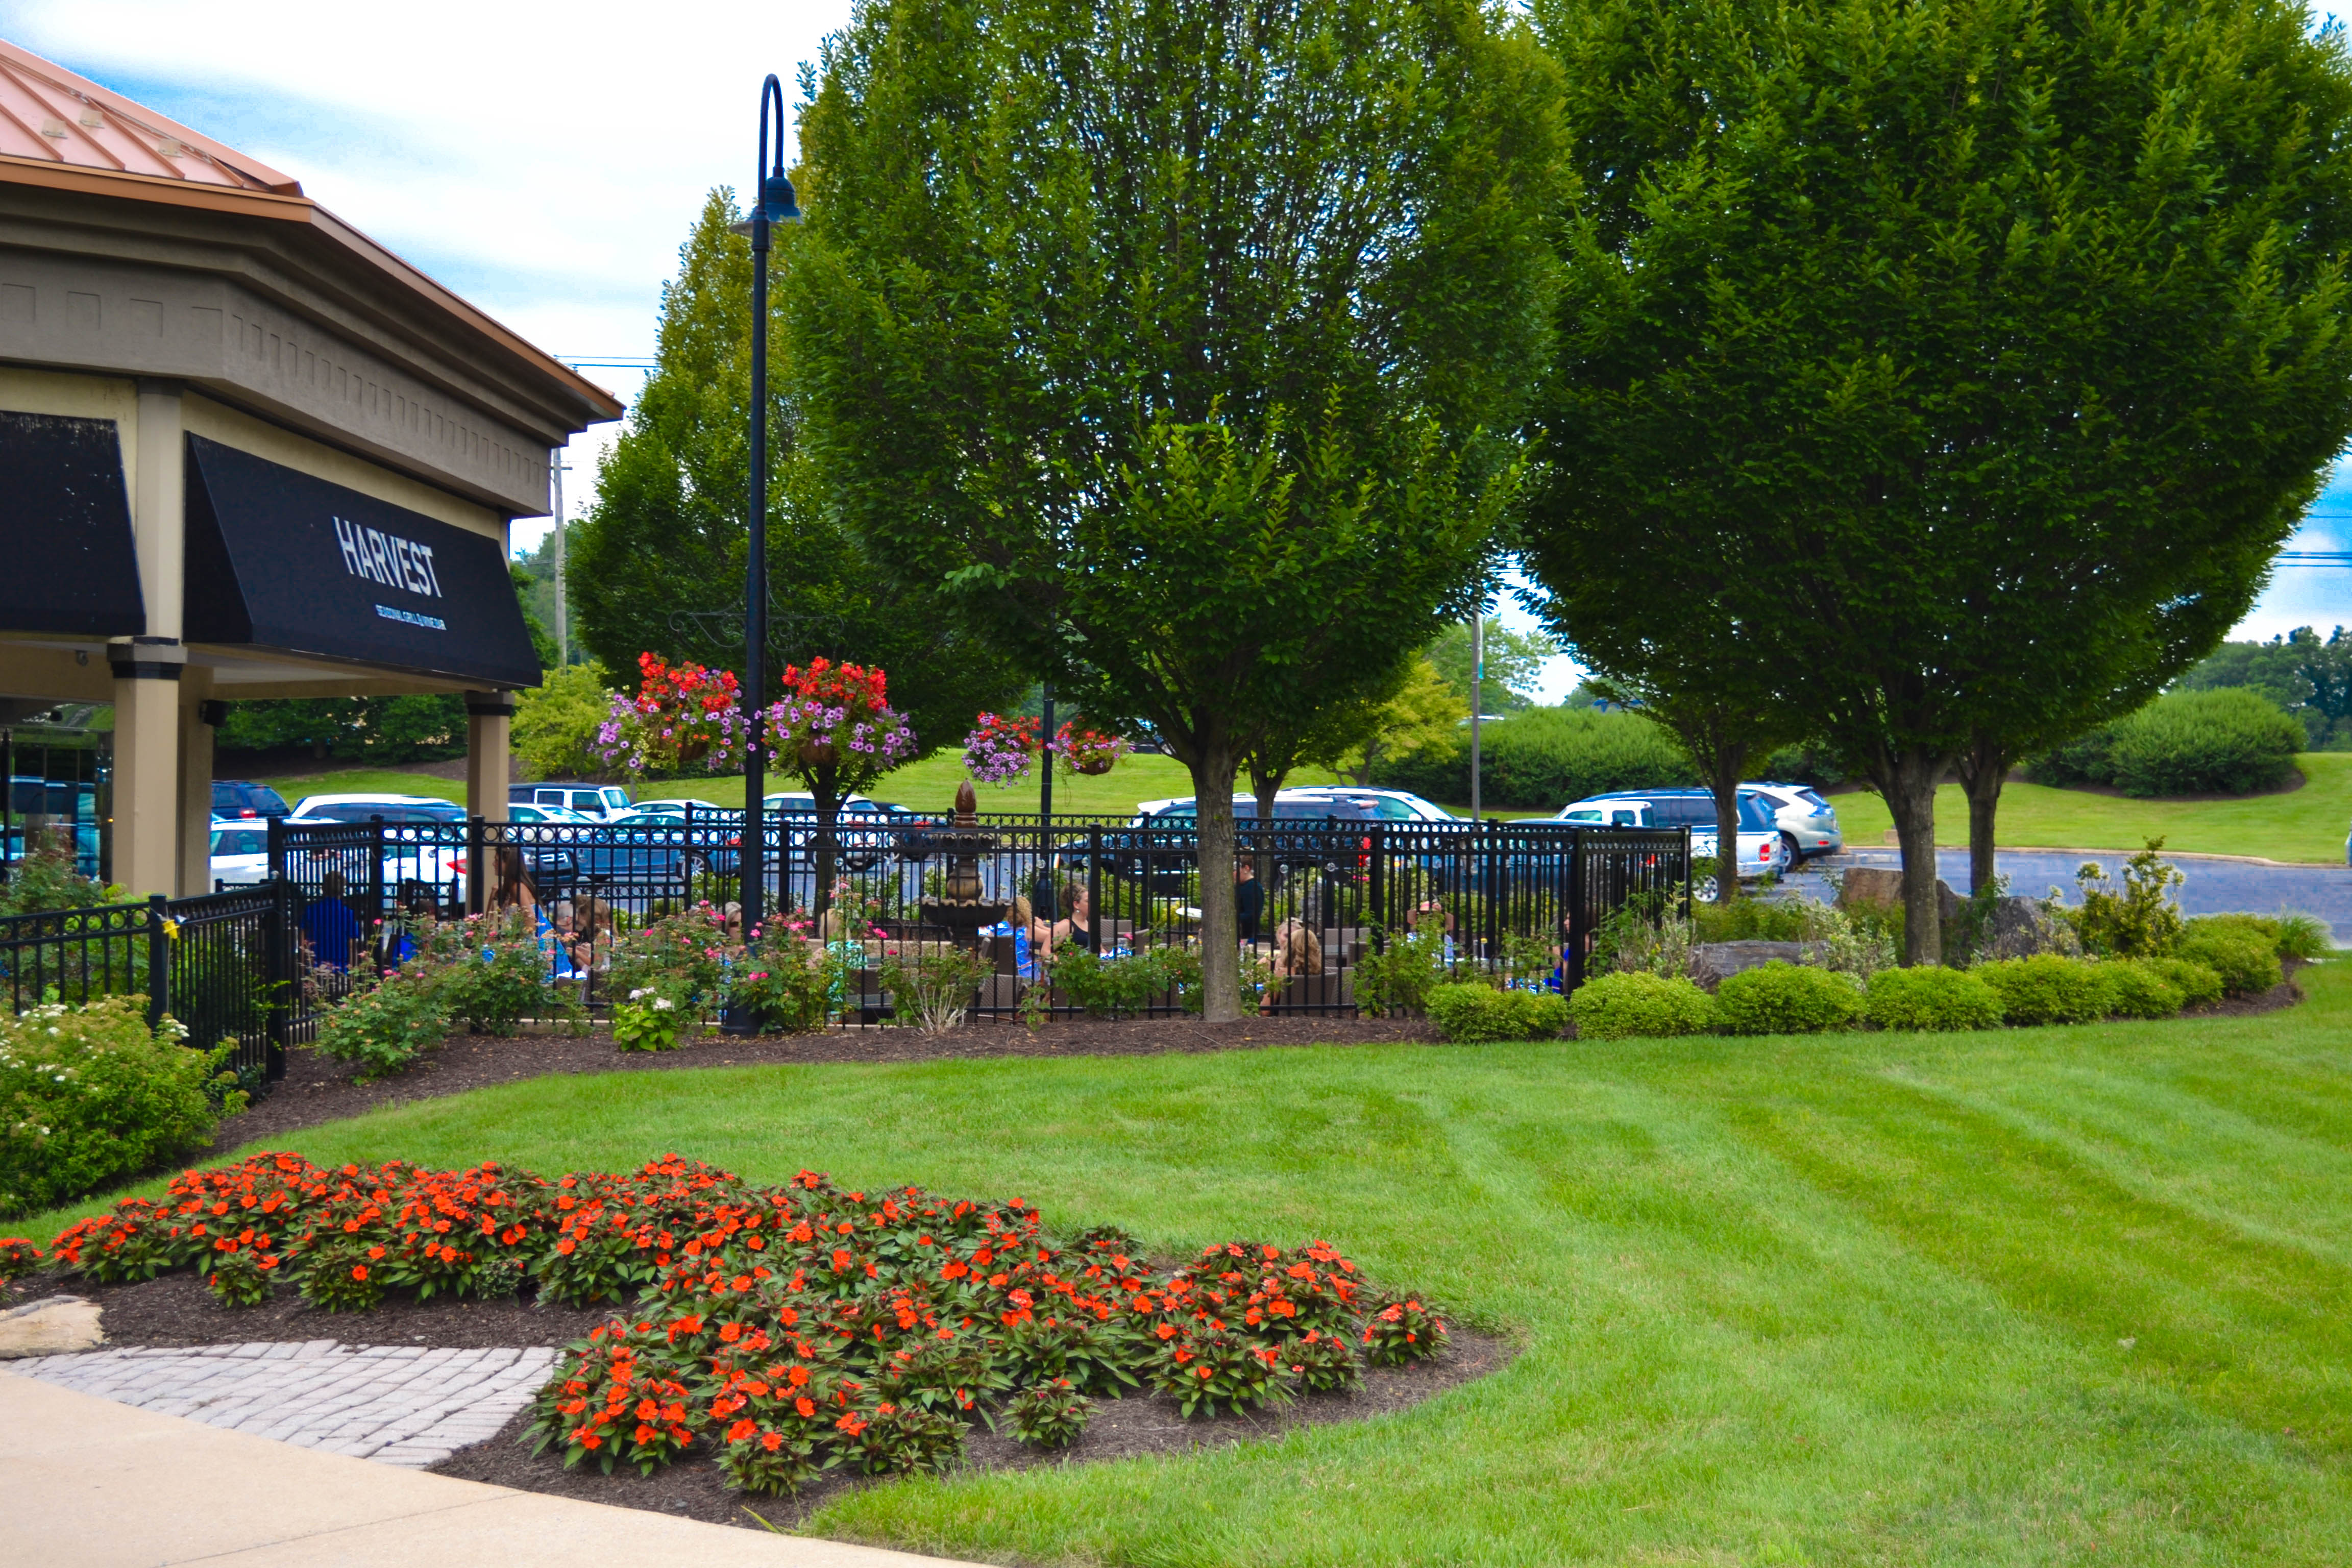 Commercial Landscape Can Influence, How To Get More Customers Landscaping